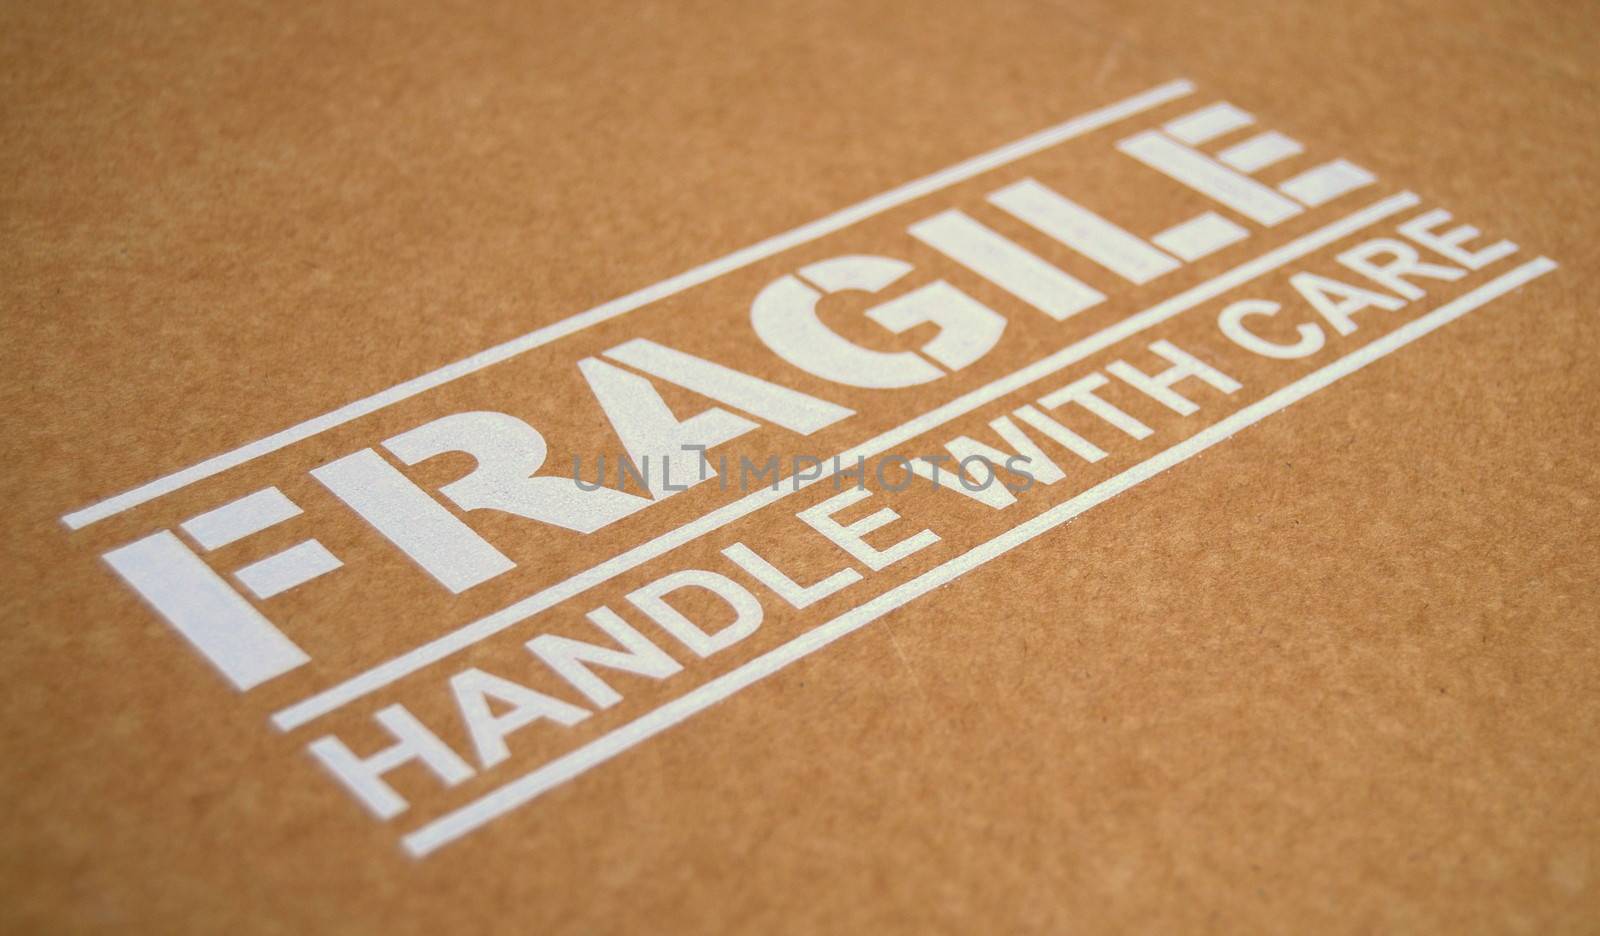 Fragile Handle With Care Sign On A Package